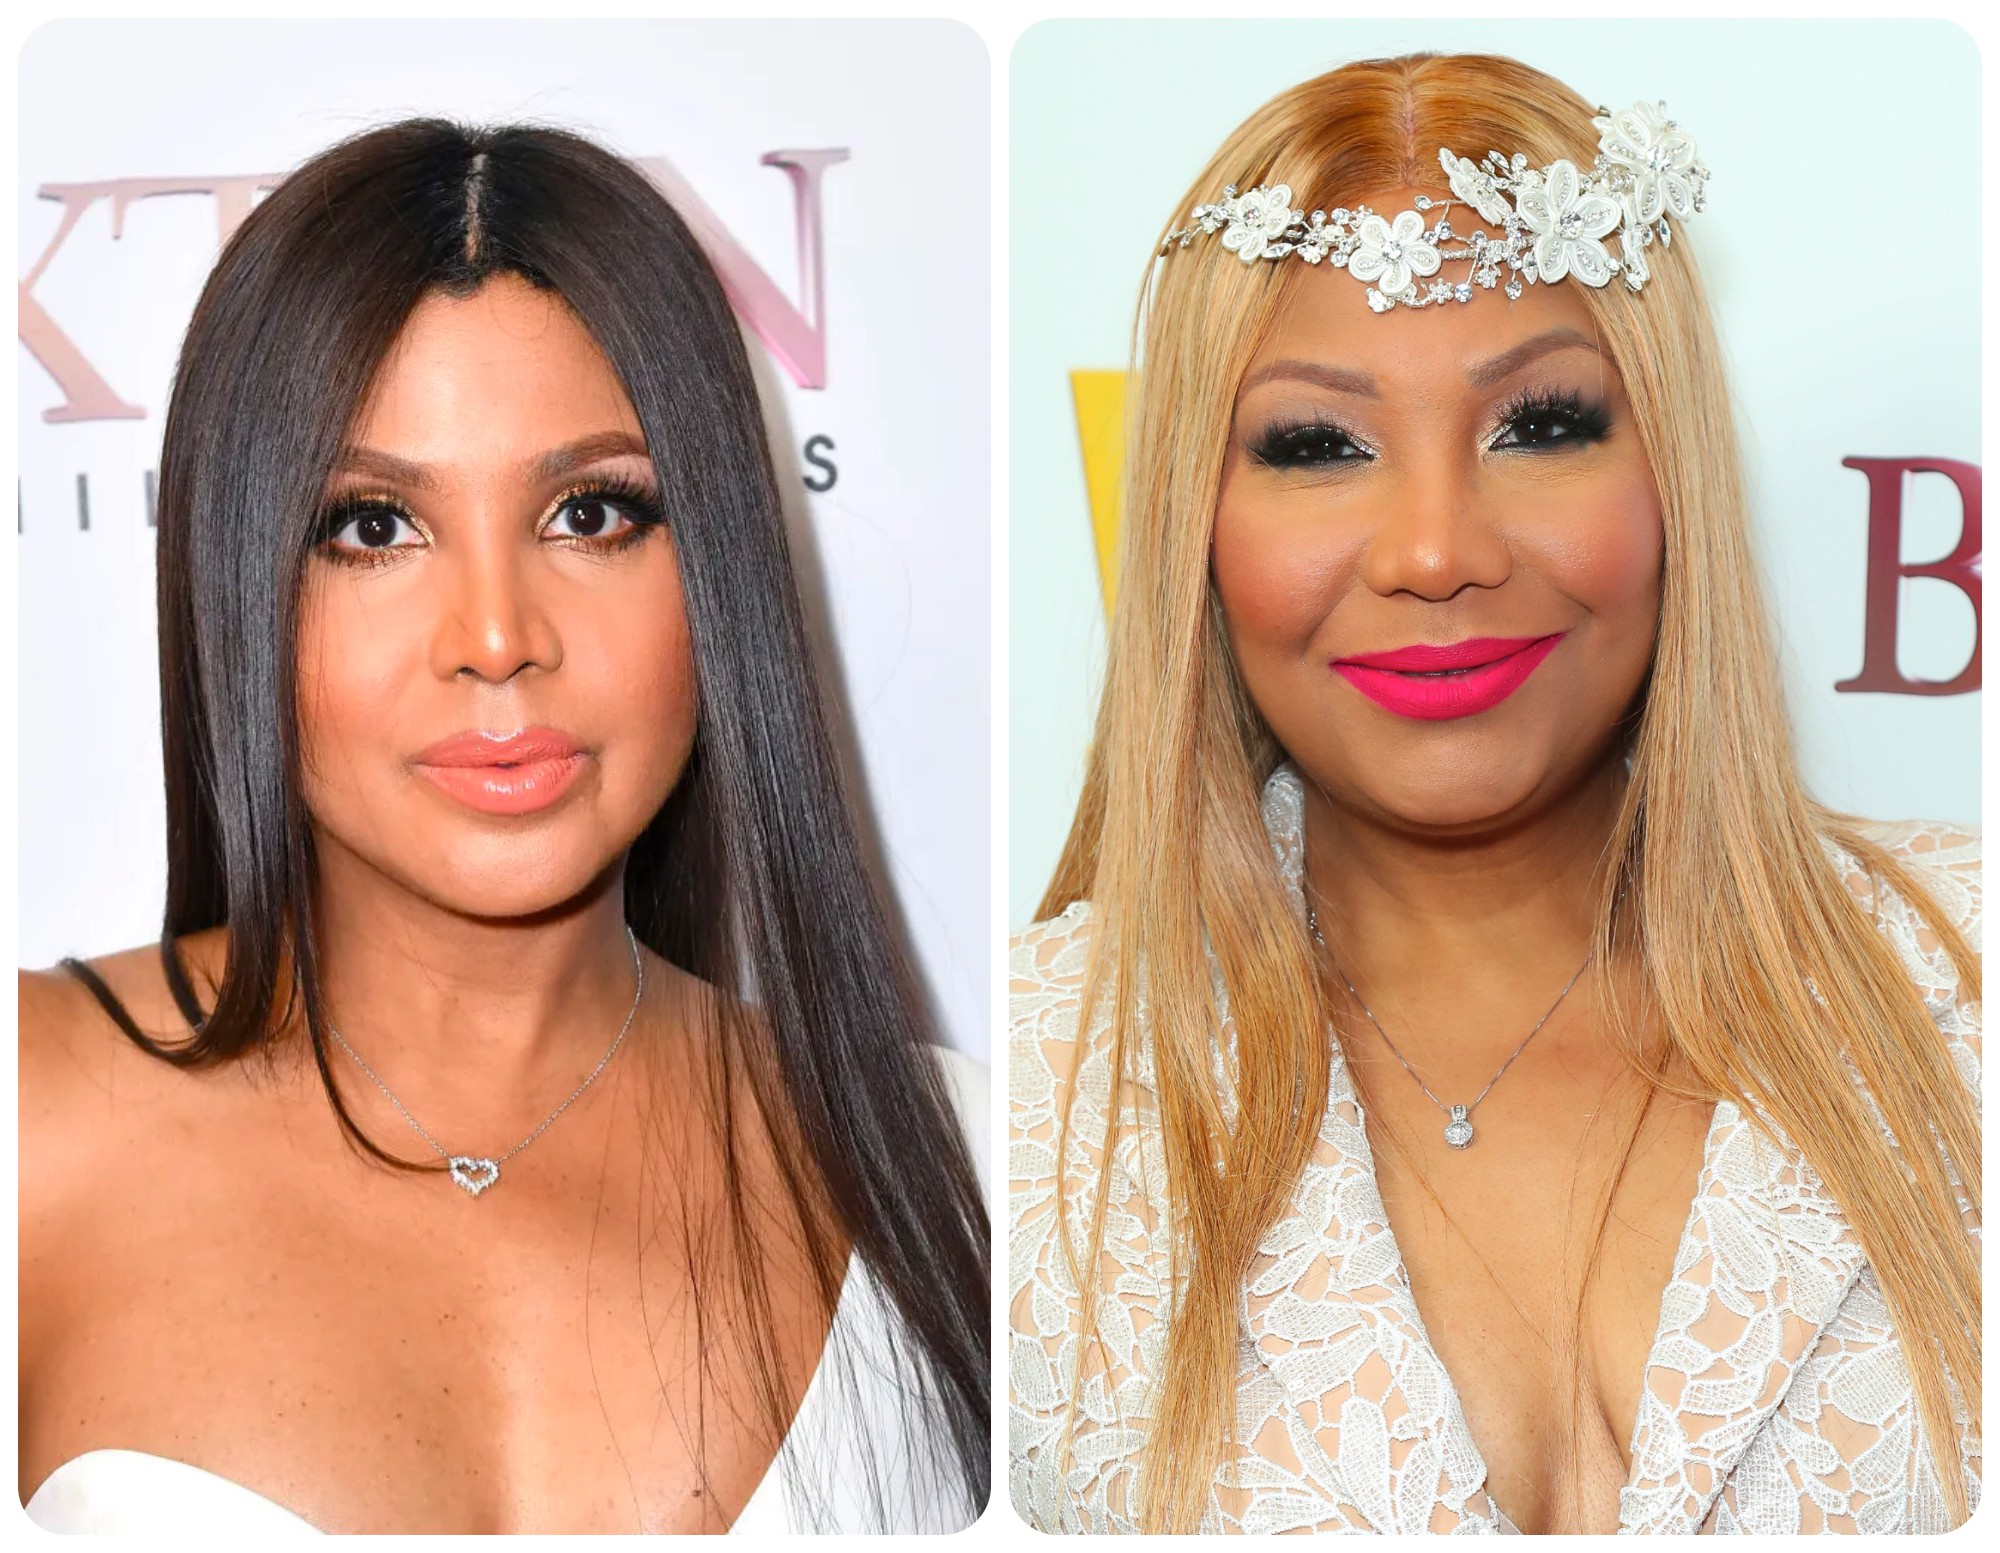 Toni Braxton Opens Up About Her Sister Traci’s Death, Family Reportedly Thinks Traci’s Husband & Team Are ‘Exploiting’ Her Passing